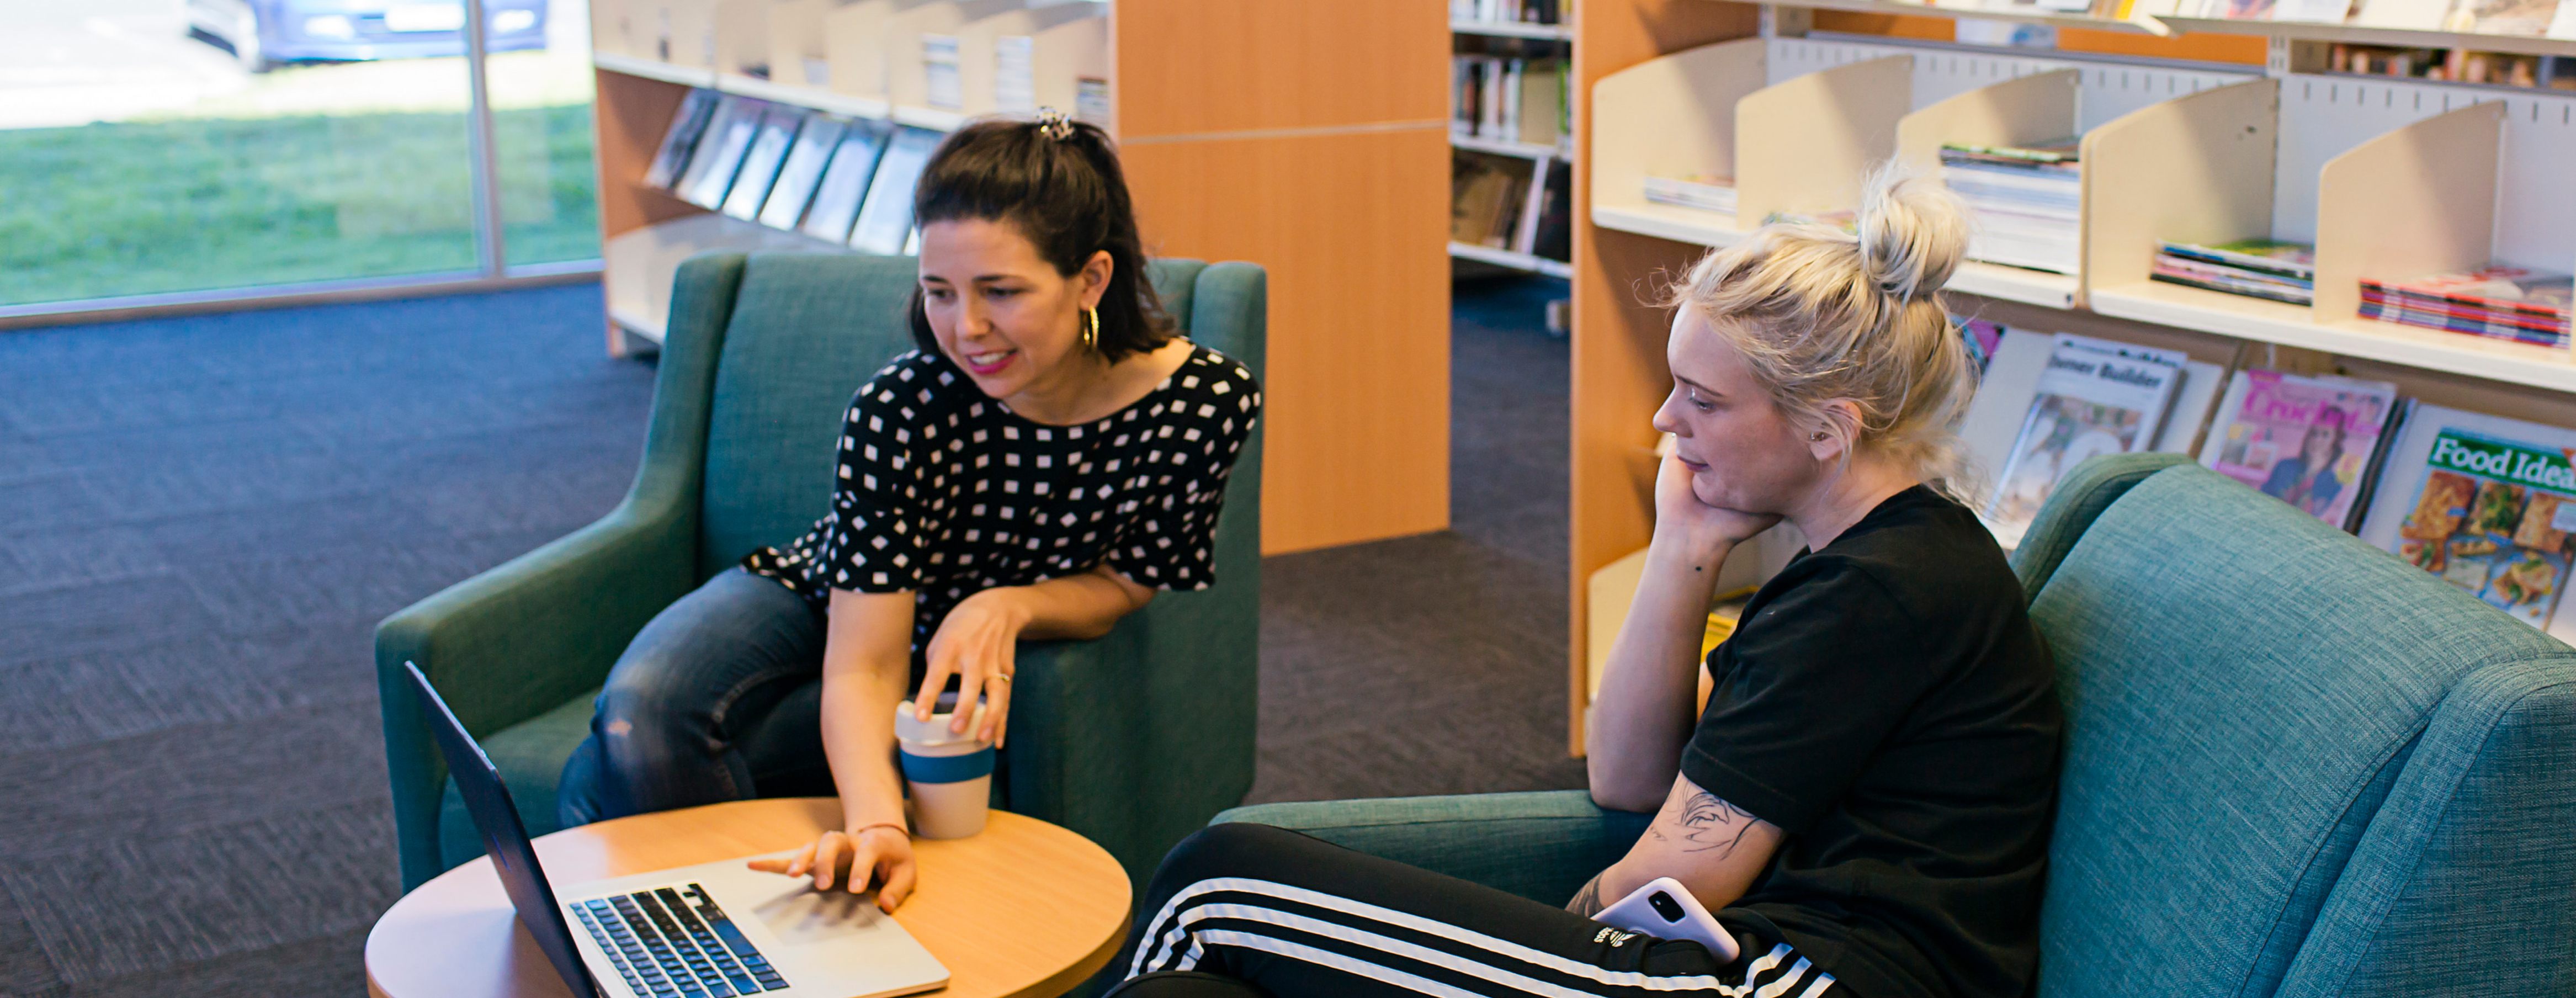 Two women look at a laptop inside a library